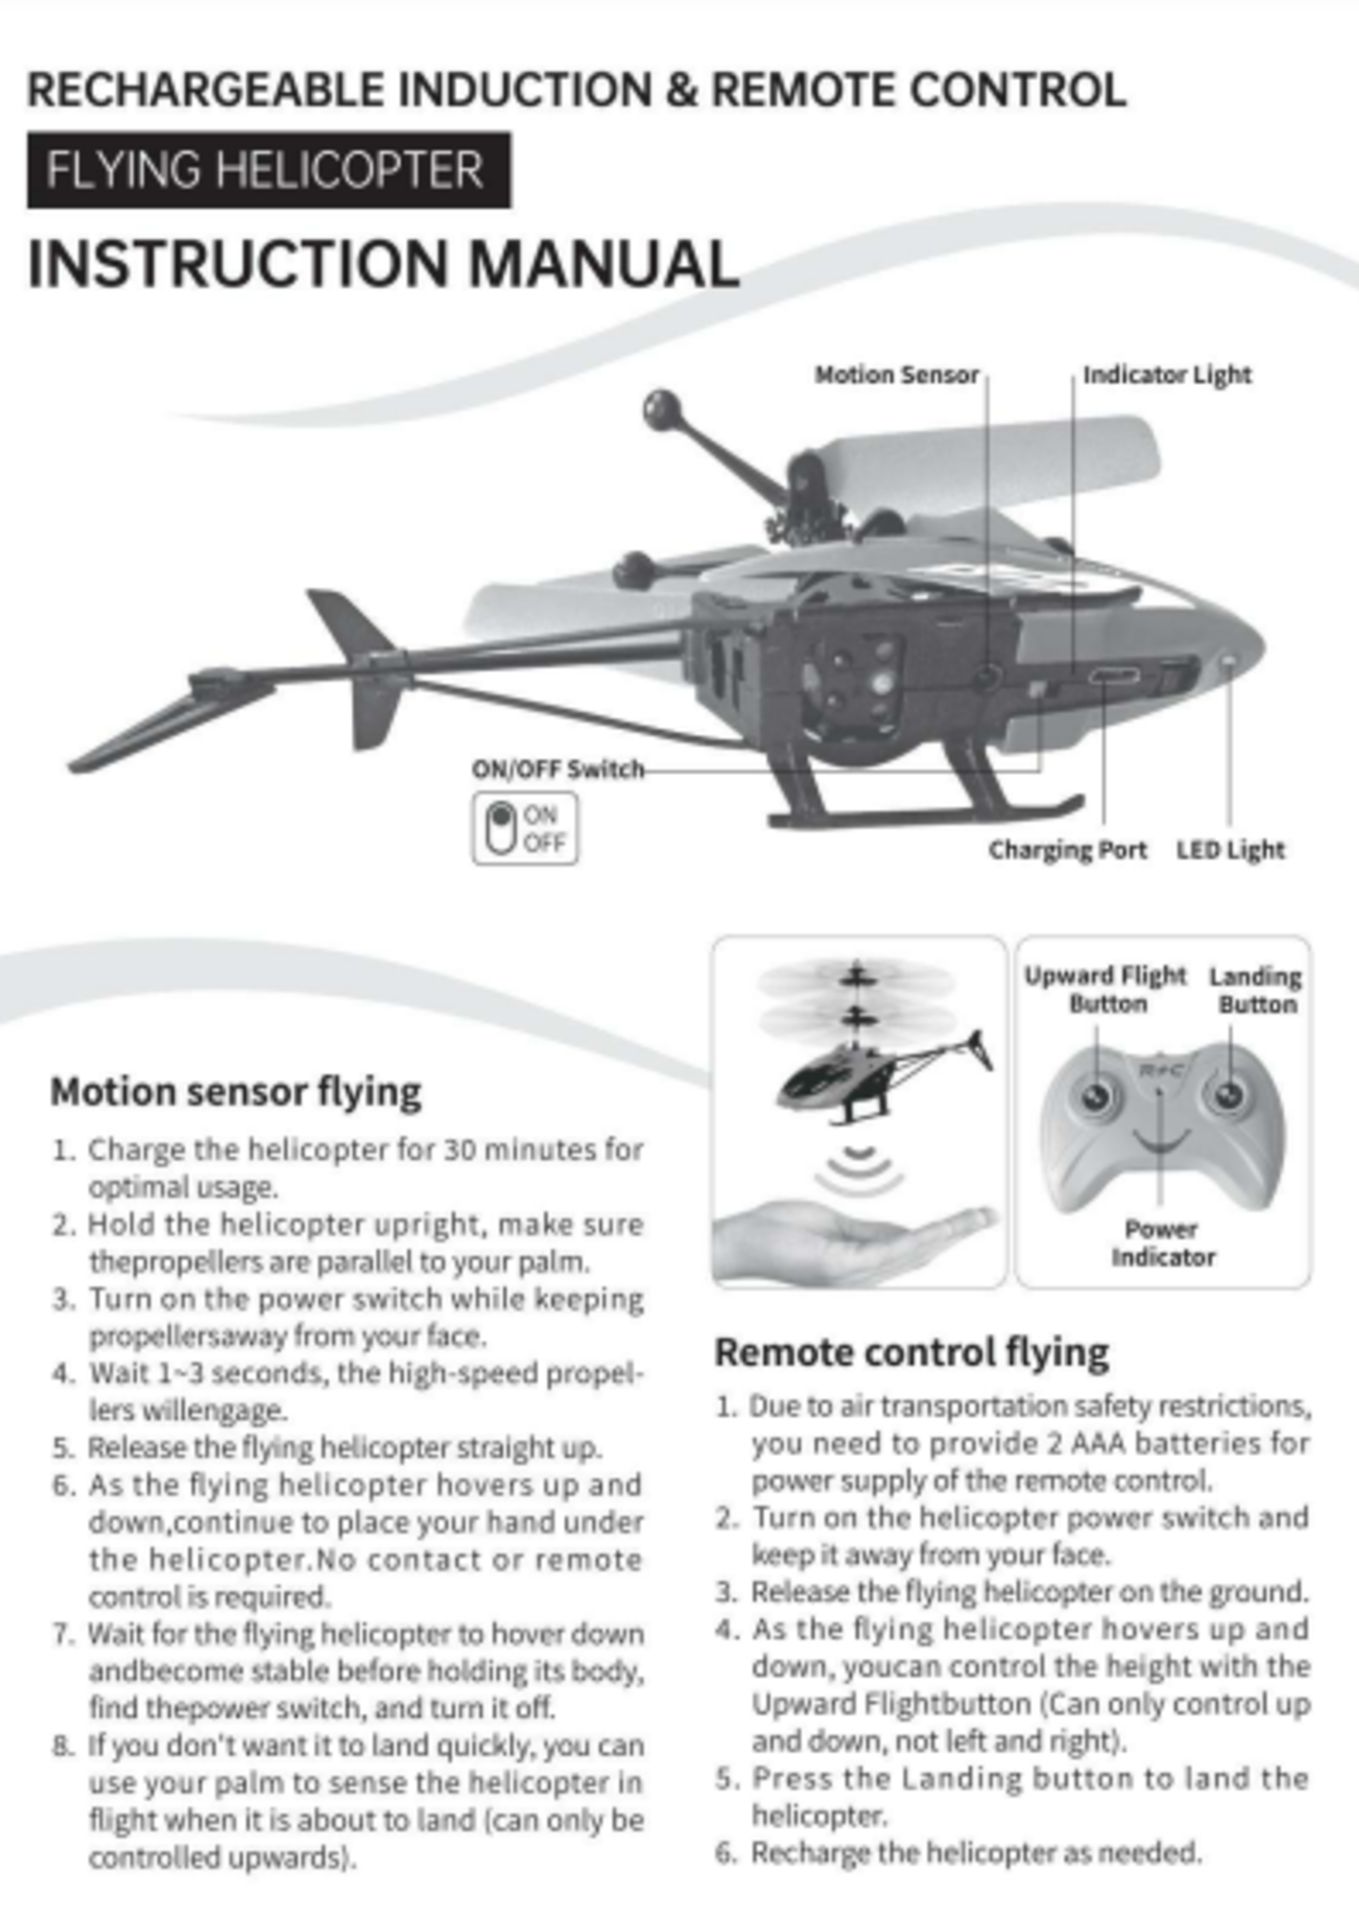 Remote Control Intelligent Induction Combat Helicopter - Image 2 of 2